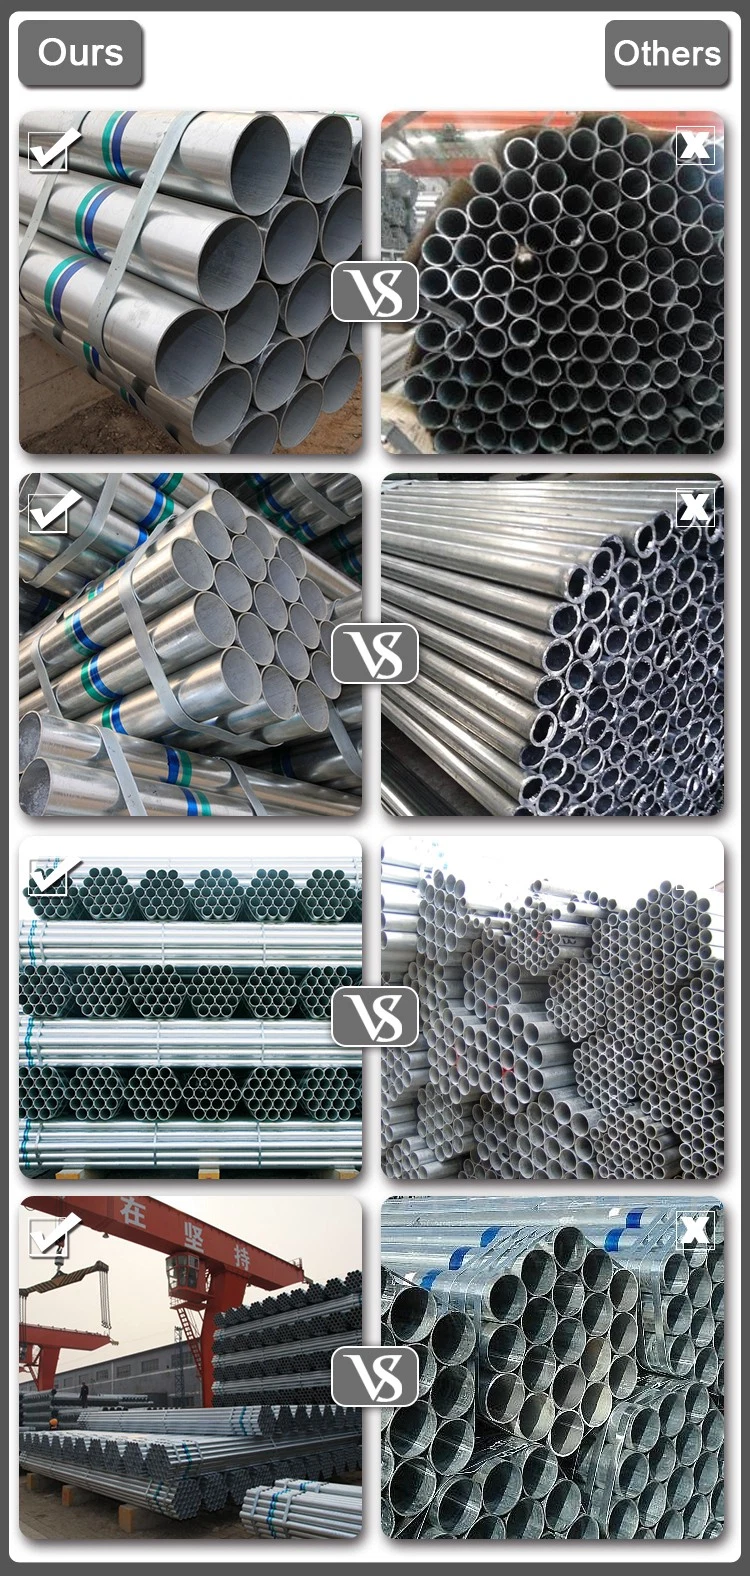 High Quality 3 Inch 4 Inch Hot DIP Galvanized Round Steel Iron Pipe Price 20 FT Galvanized Steel Pipe